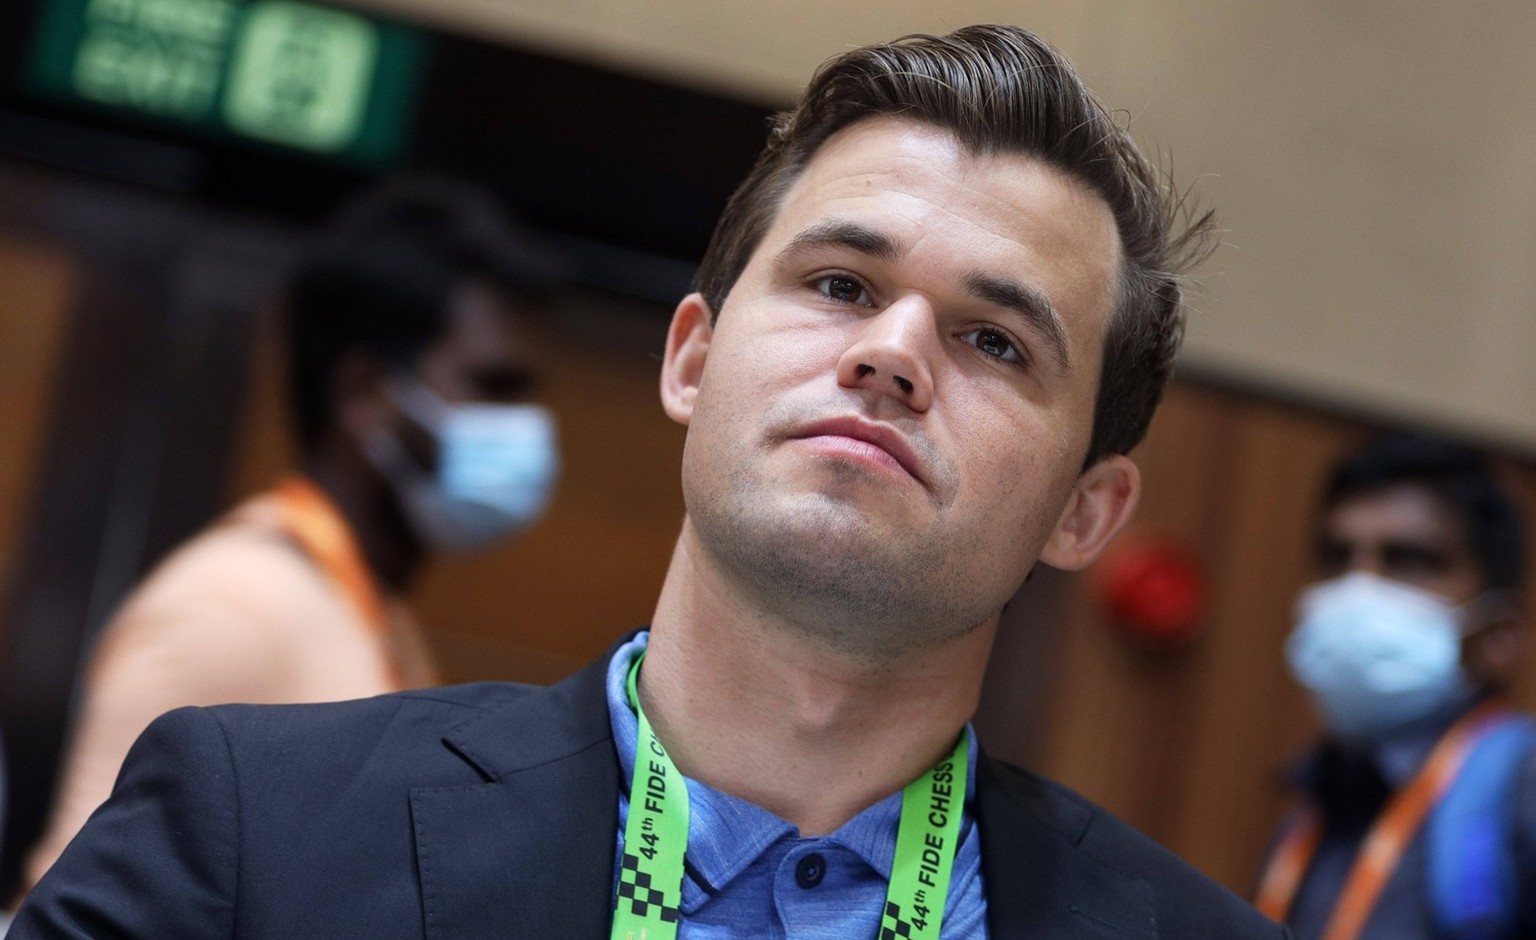 July 31, 2022, Chennai, Tamil Nadu, India: Grand Master Magnus Carlsen from Norway is seen during the round 3 of the 44th FIDE Chess Olympiad in Chennai. Chennai India - ZUMAl172 20220731_zip_l172_008 ...